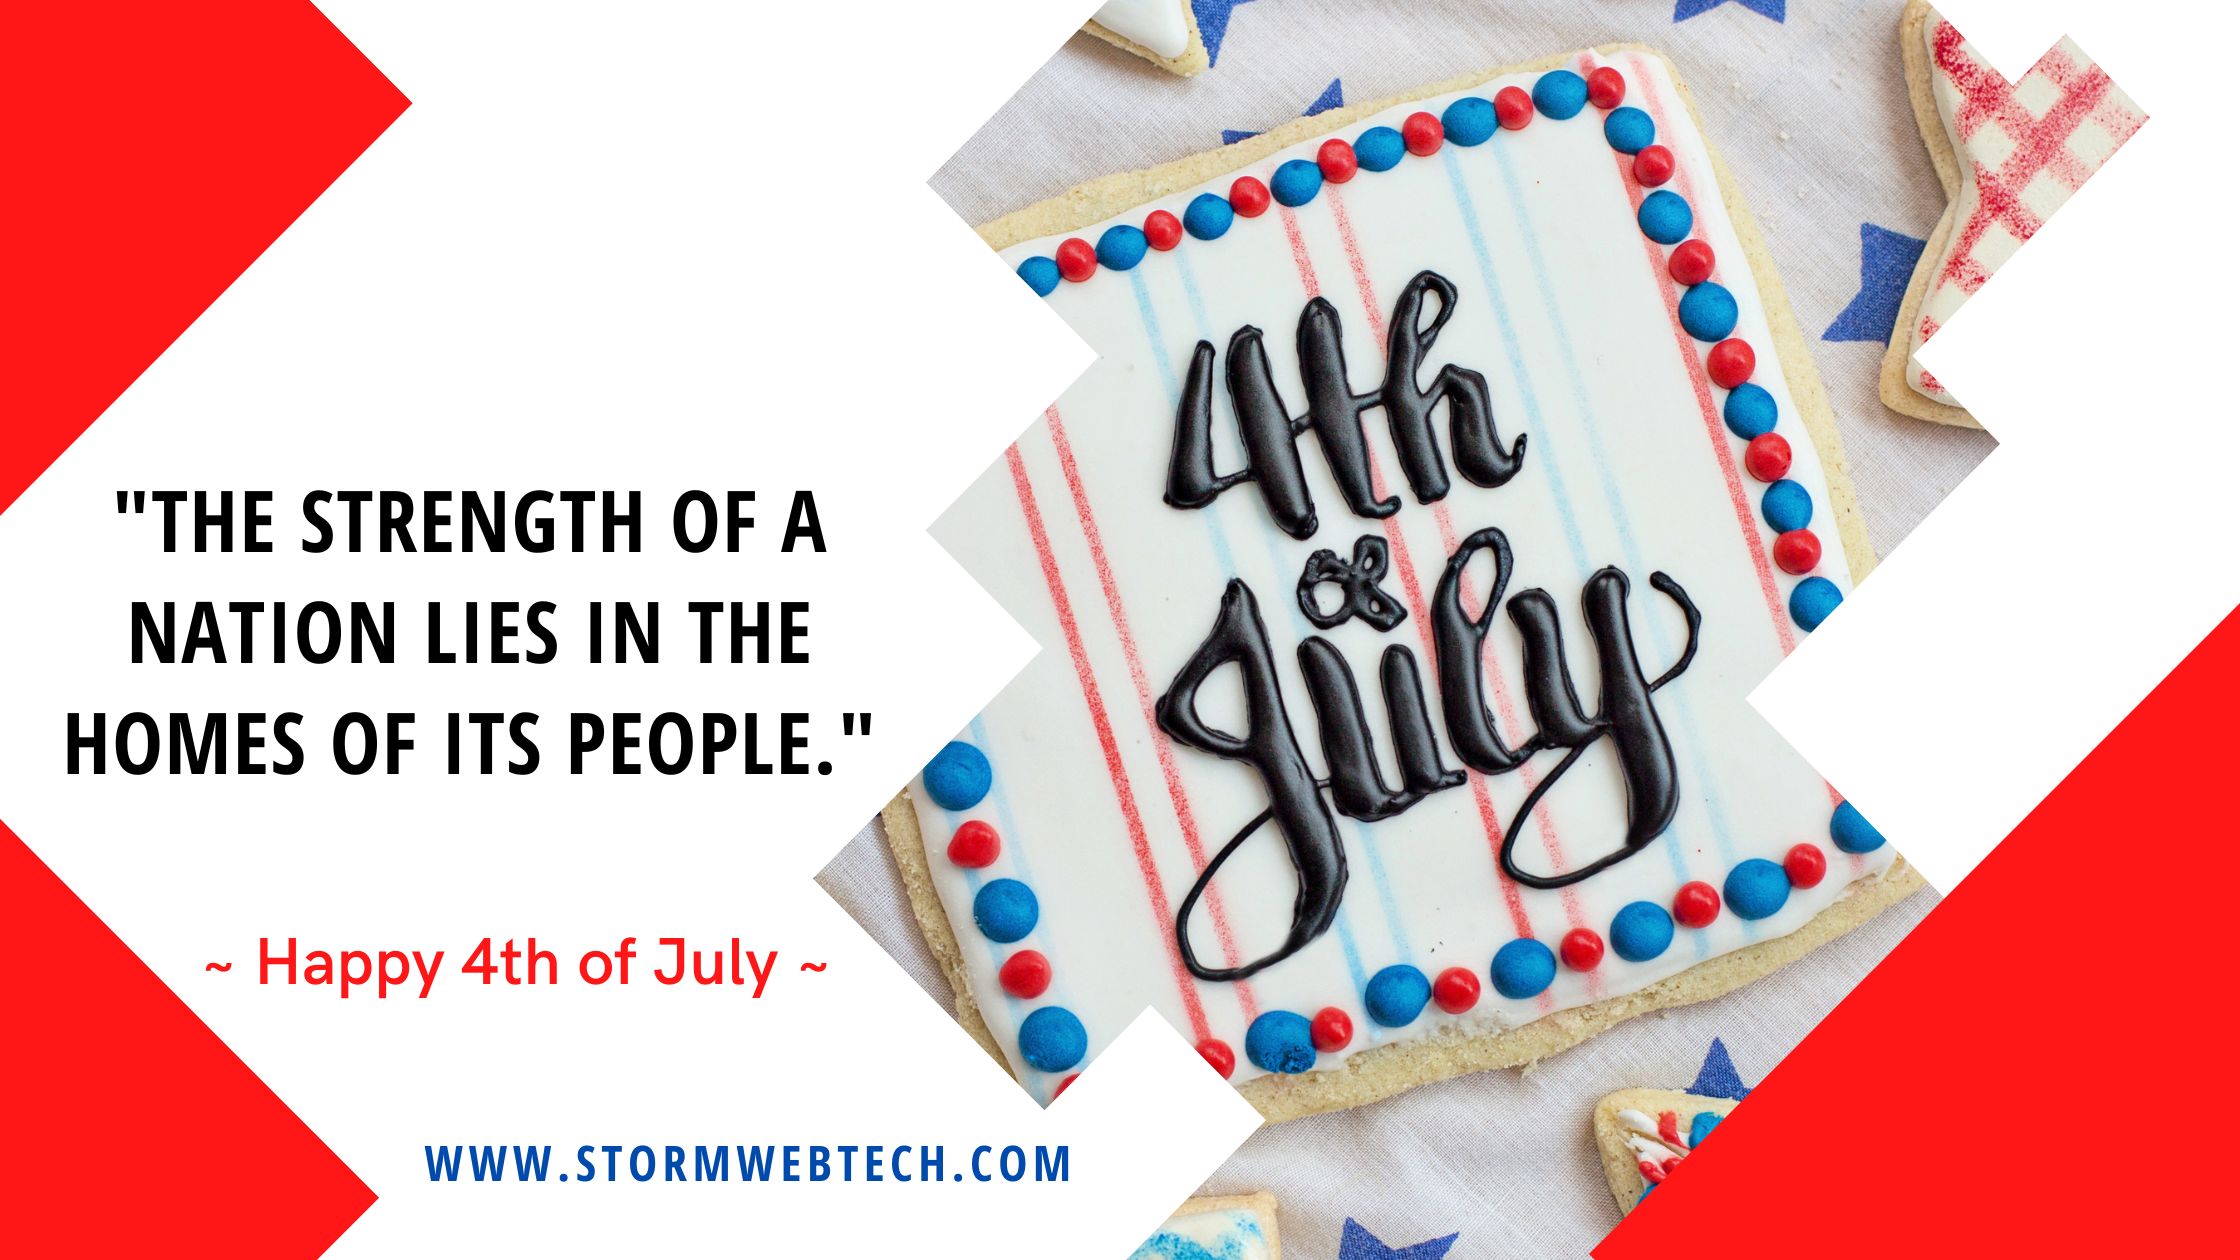 happy 4th of july quotes, The 4th of July is a special occasion for Americans to commemorate the birth of their nation.